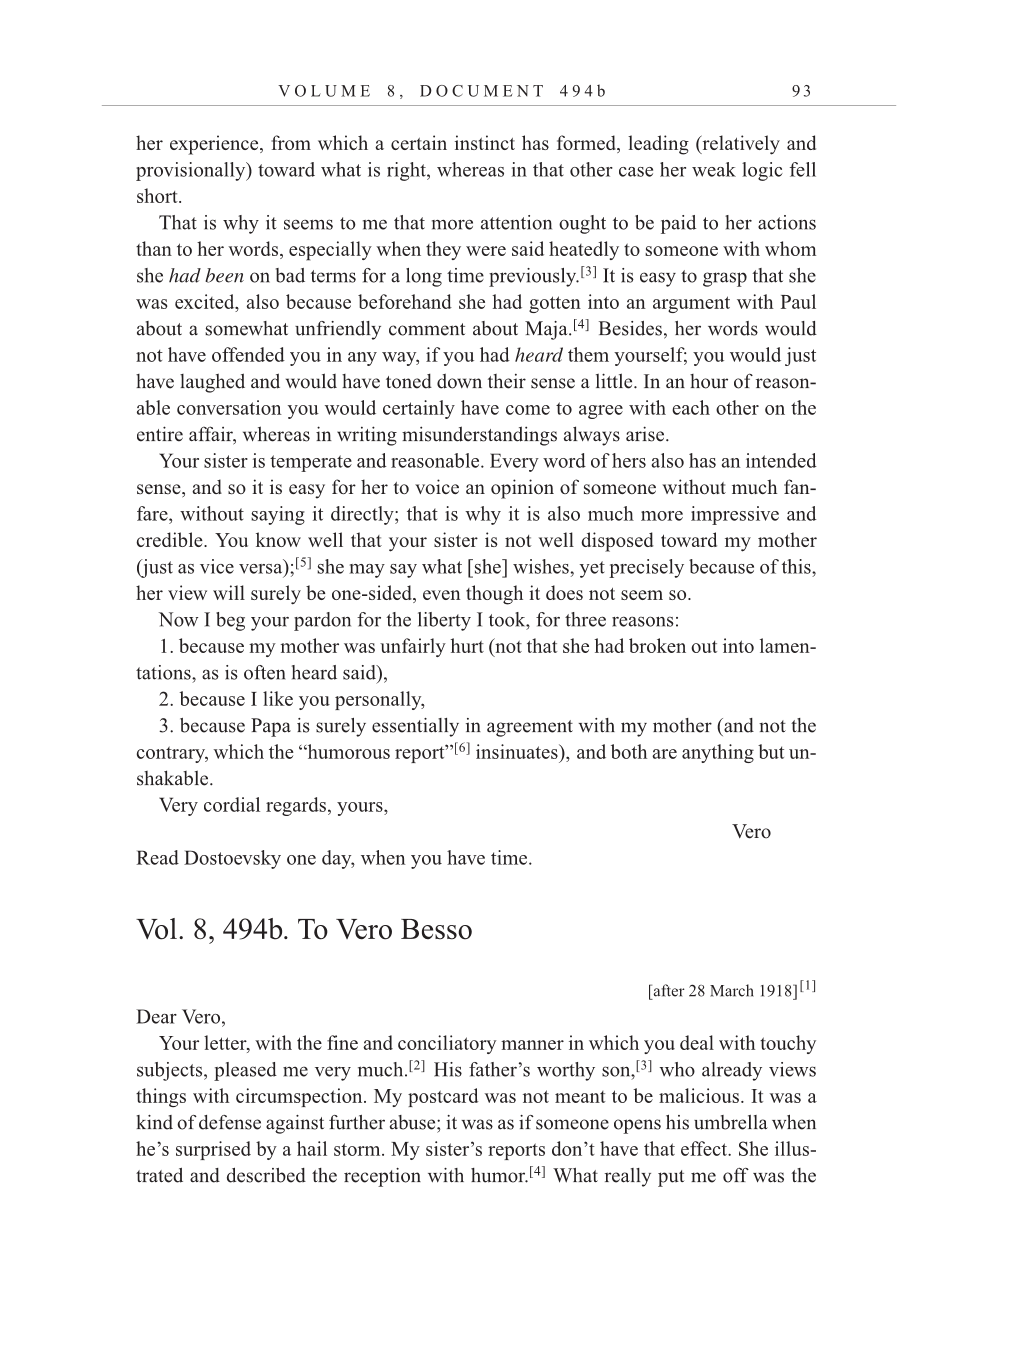 Volume 10: The Berlin Years: Correspondence, May-December 1920, and Supplementary Correspondence, 1909-1920 (English translation supplement) page 93